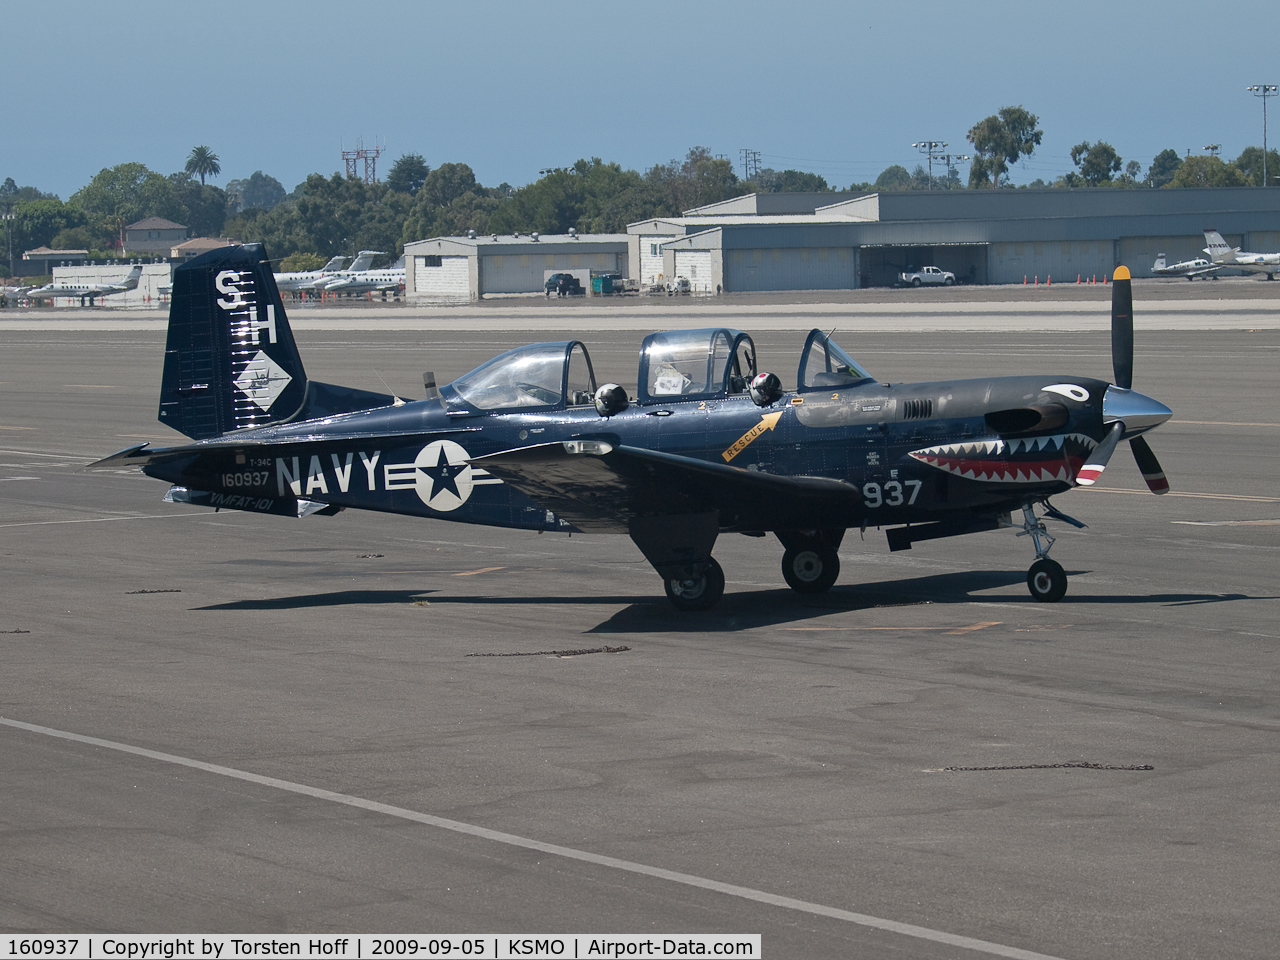 160937, Beech T-34C Turbo Mentor C/N GL-123, 160937 parked at KSMO